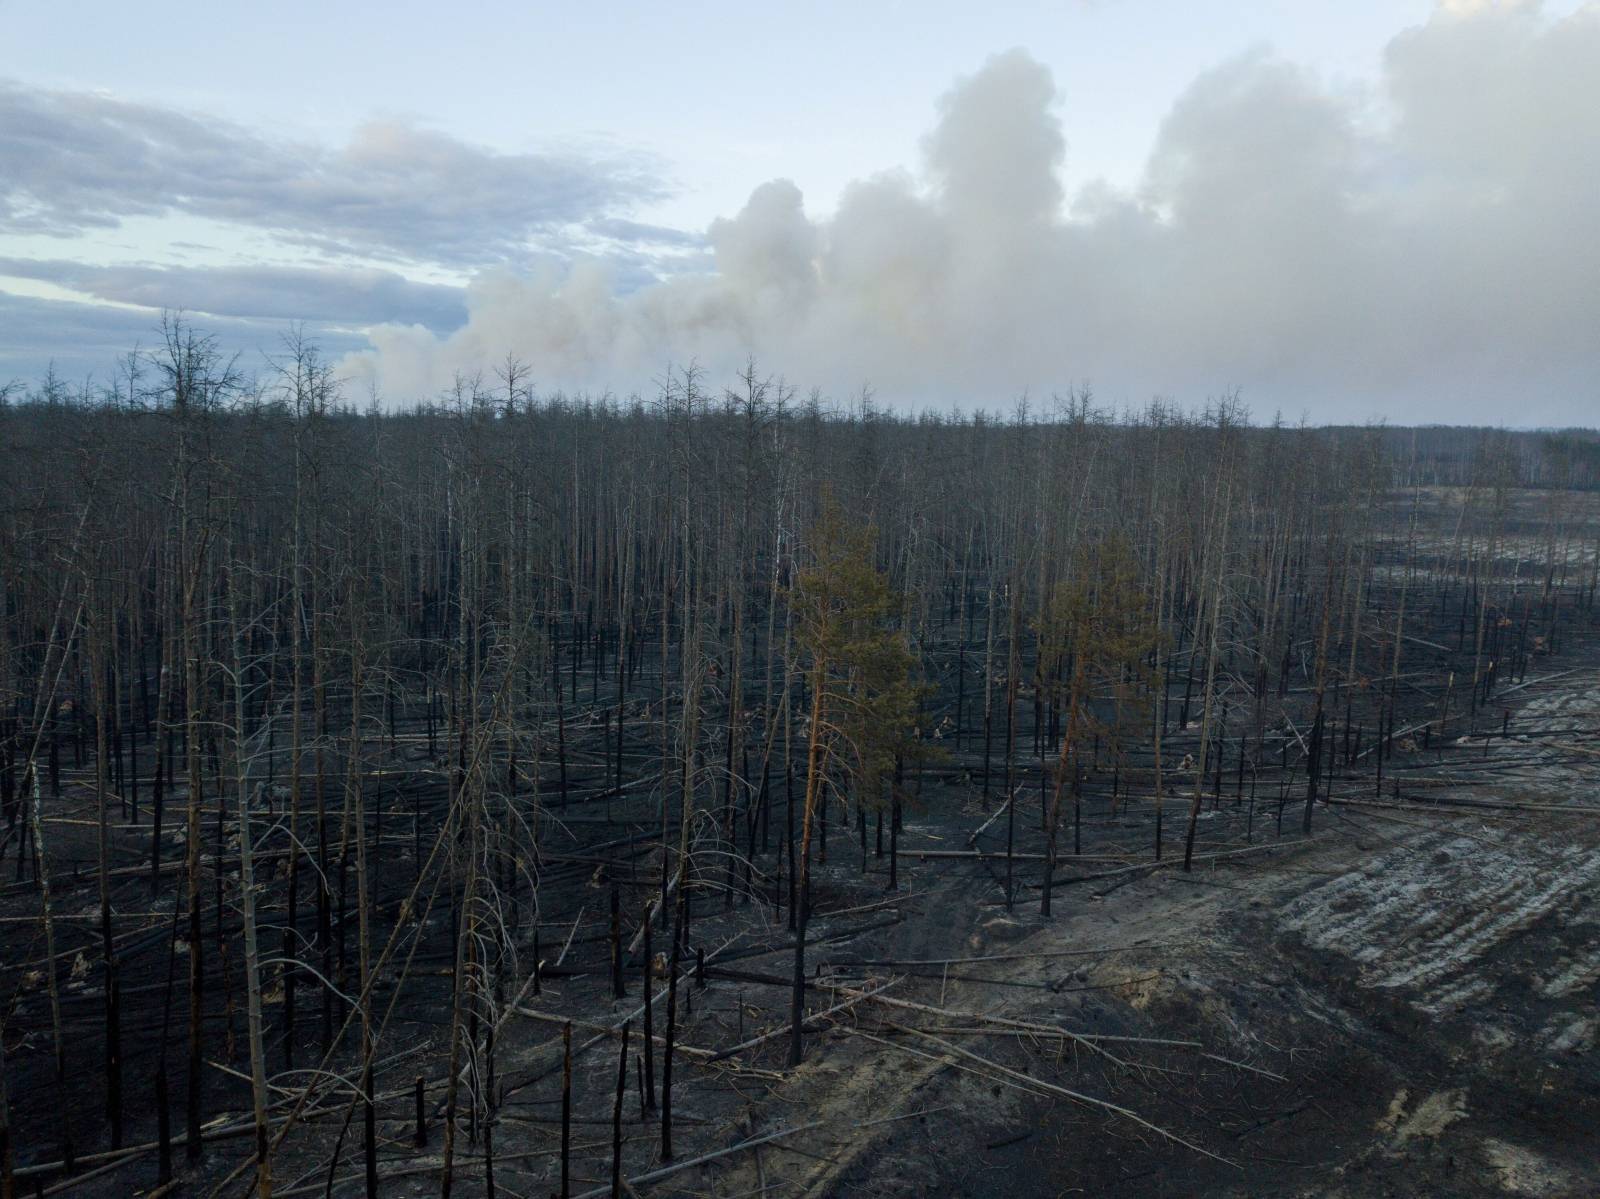 A view shows burnt trees and plants in Zhytomyr Region